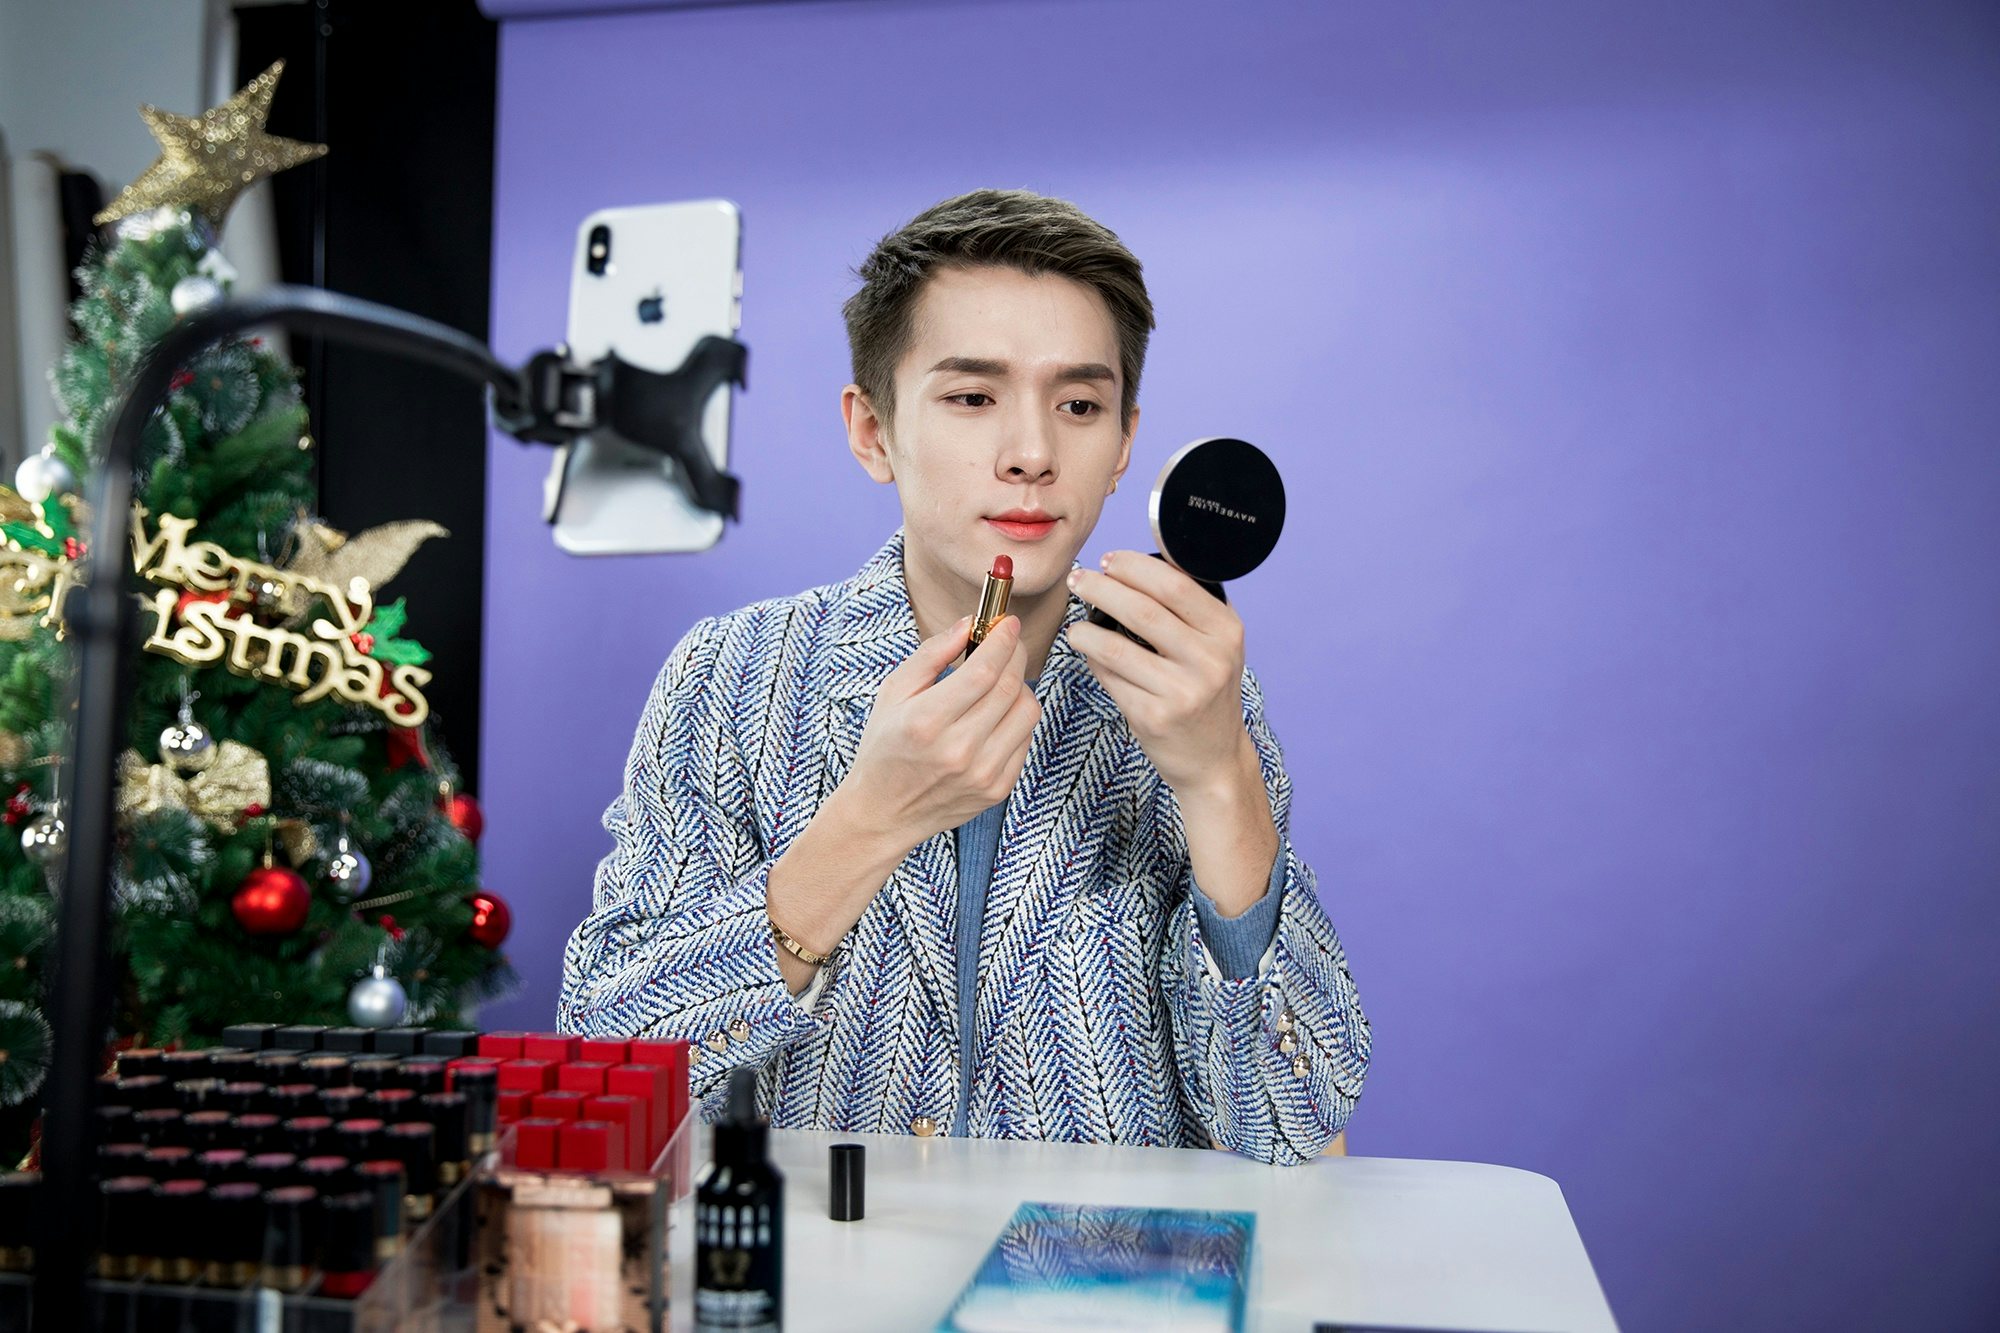 Beauty blogger Austin Li Jiaqi applies lipstick on his mouth while livestreaming on Taobao on January 3, 2018 in Shanghai. Photo: Ghetty Images